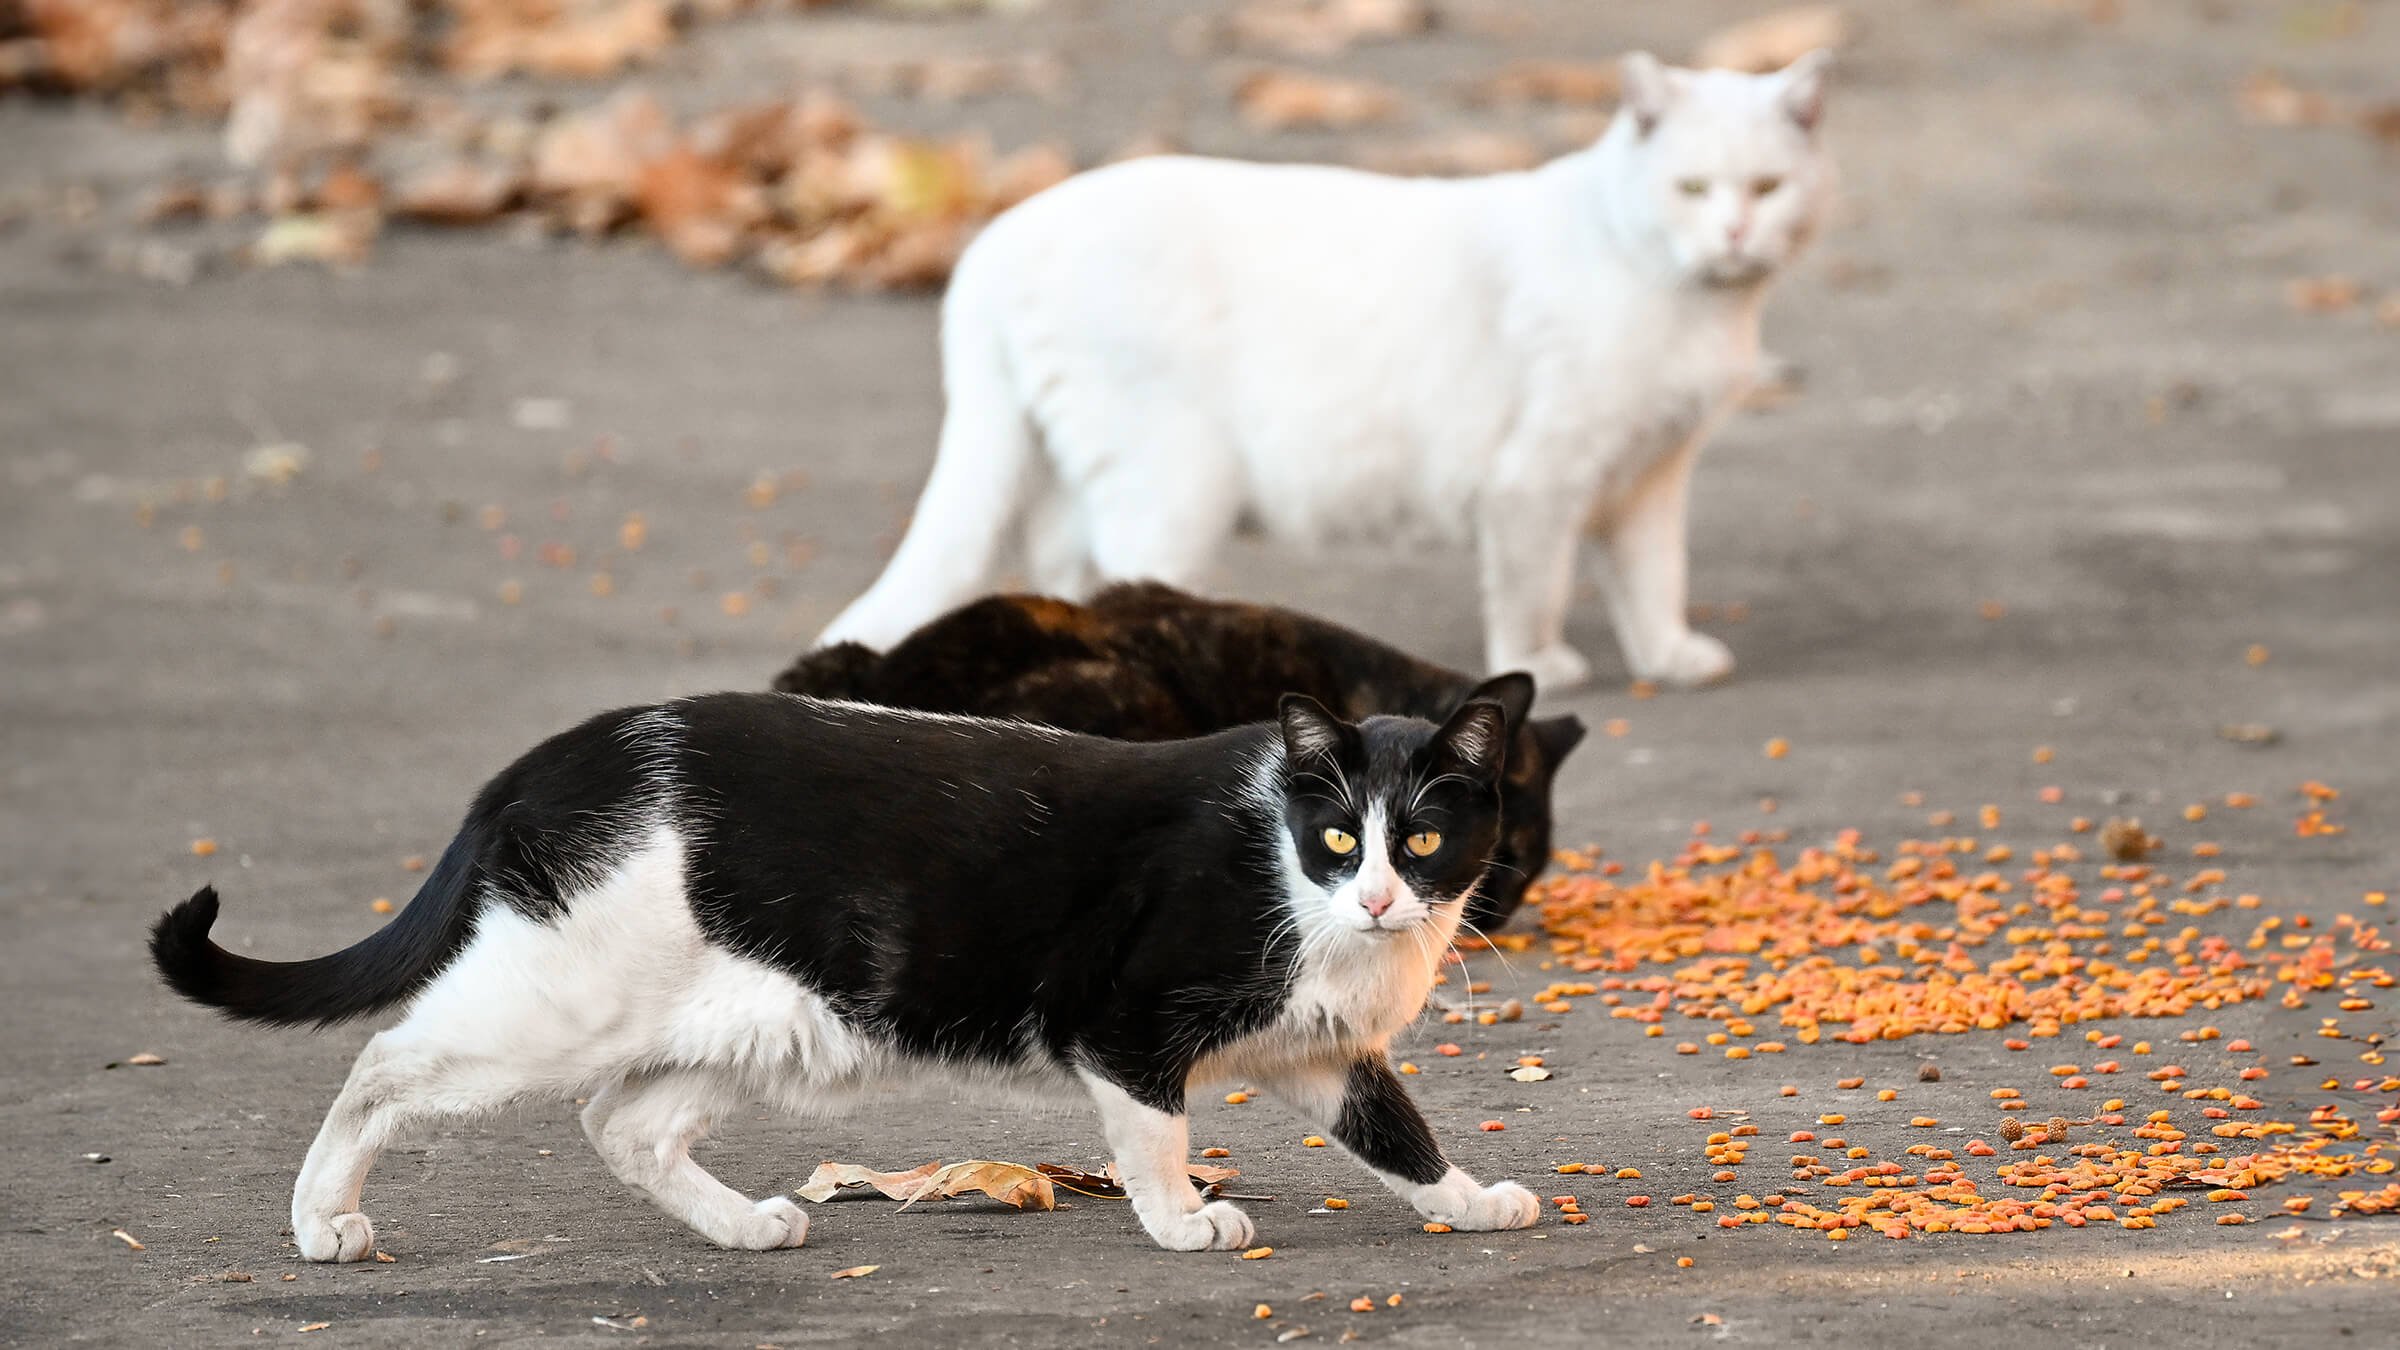 Three cats approach kibble scattered on the grounds of the Los Angeles Memorial Coliseum.